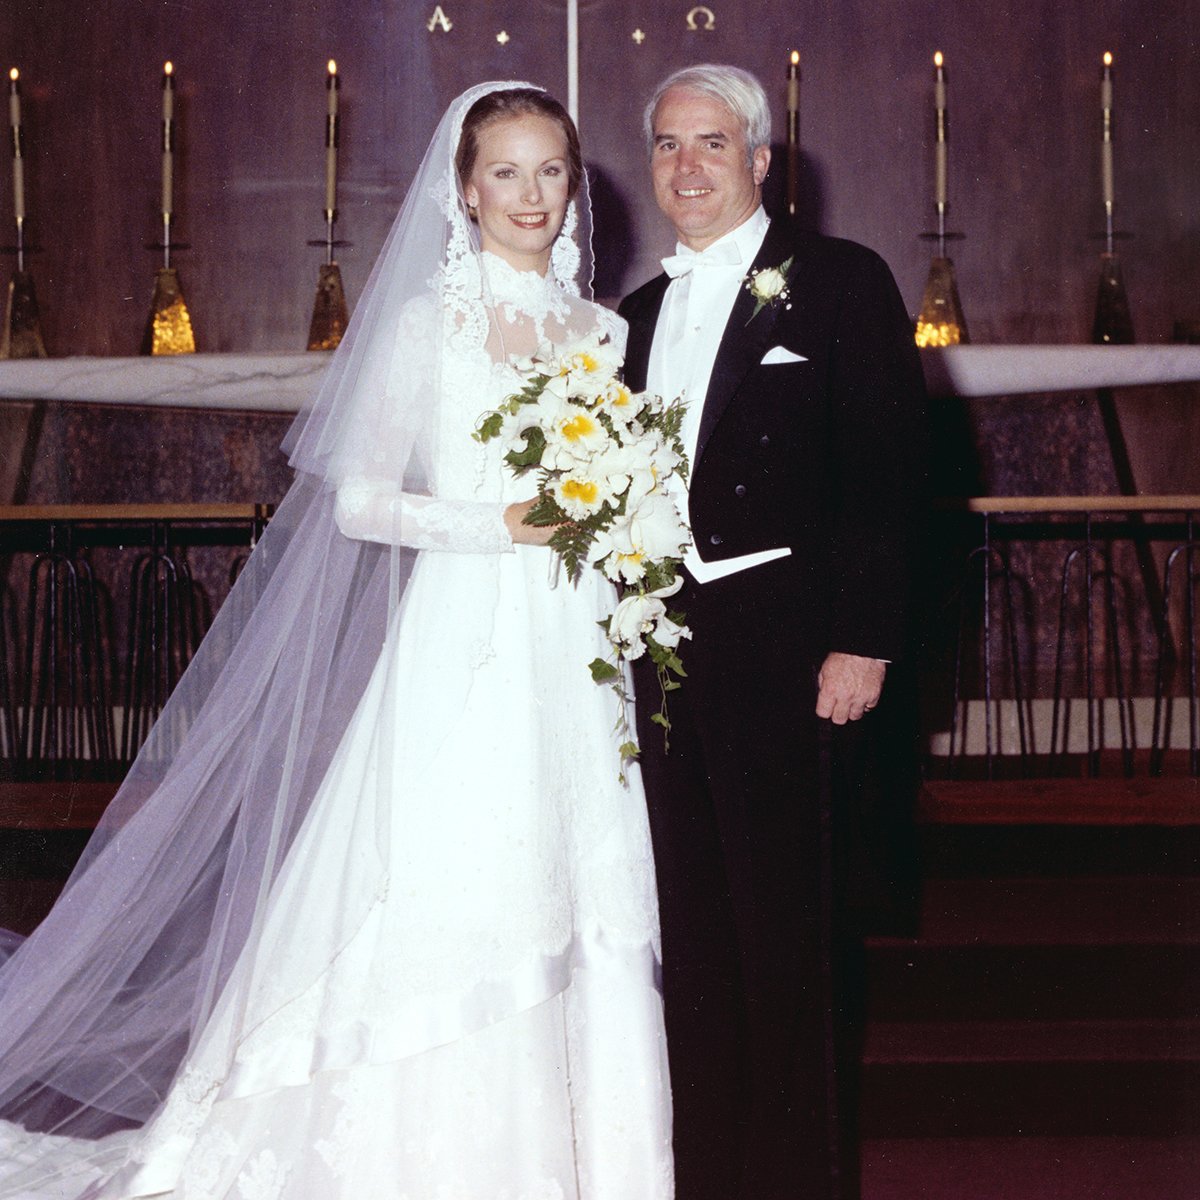 Today we celebrate the 44th wedding anniversary of Sen. John McCain and @cindymccain. We are proud to honor the McCain family as we continue their dedication to public service.